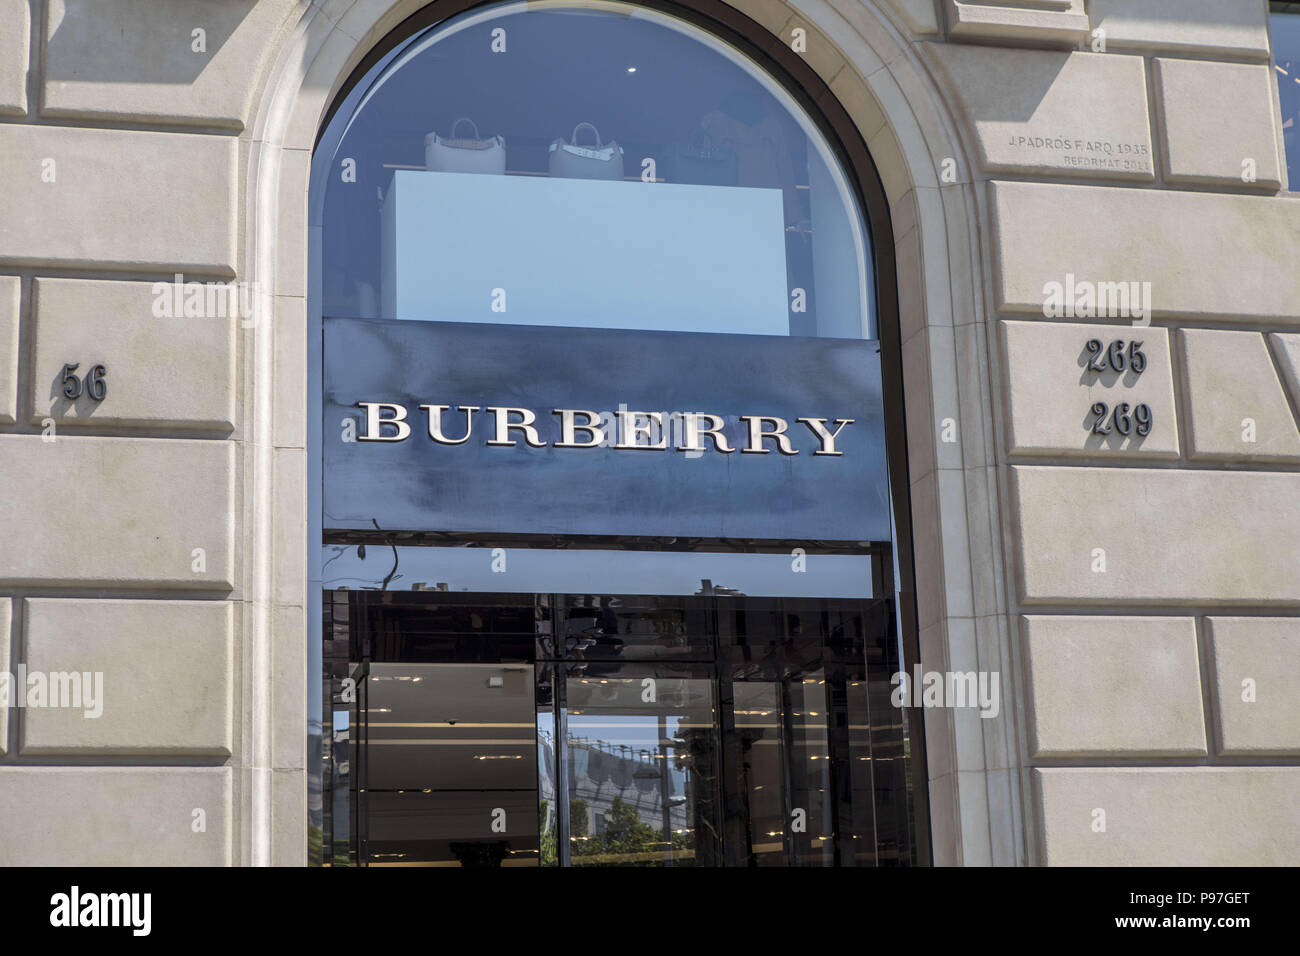 grote Oceaan Maak los kolf Burberry sign on Passeig de Gràcia street in Barcelona. Barcelona is a city  in Spain. It is the capital and largest city of Catalonia, as well as the  second most populous municipality of Spain. In 2009 the city was ranked  Europe's third and one of the world's ...